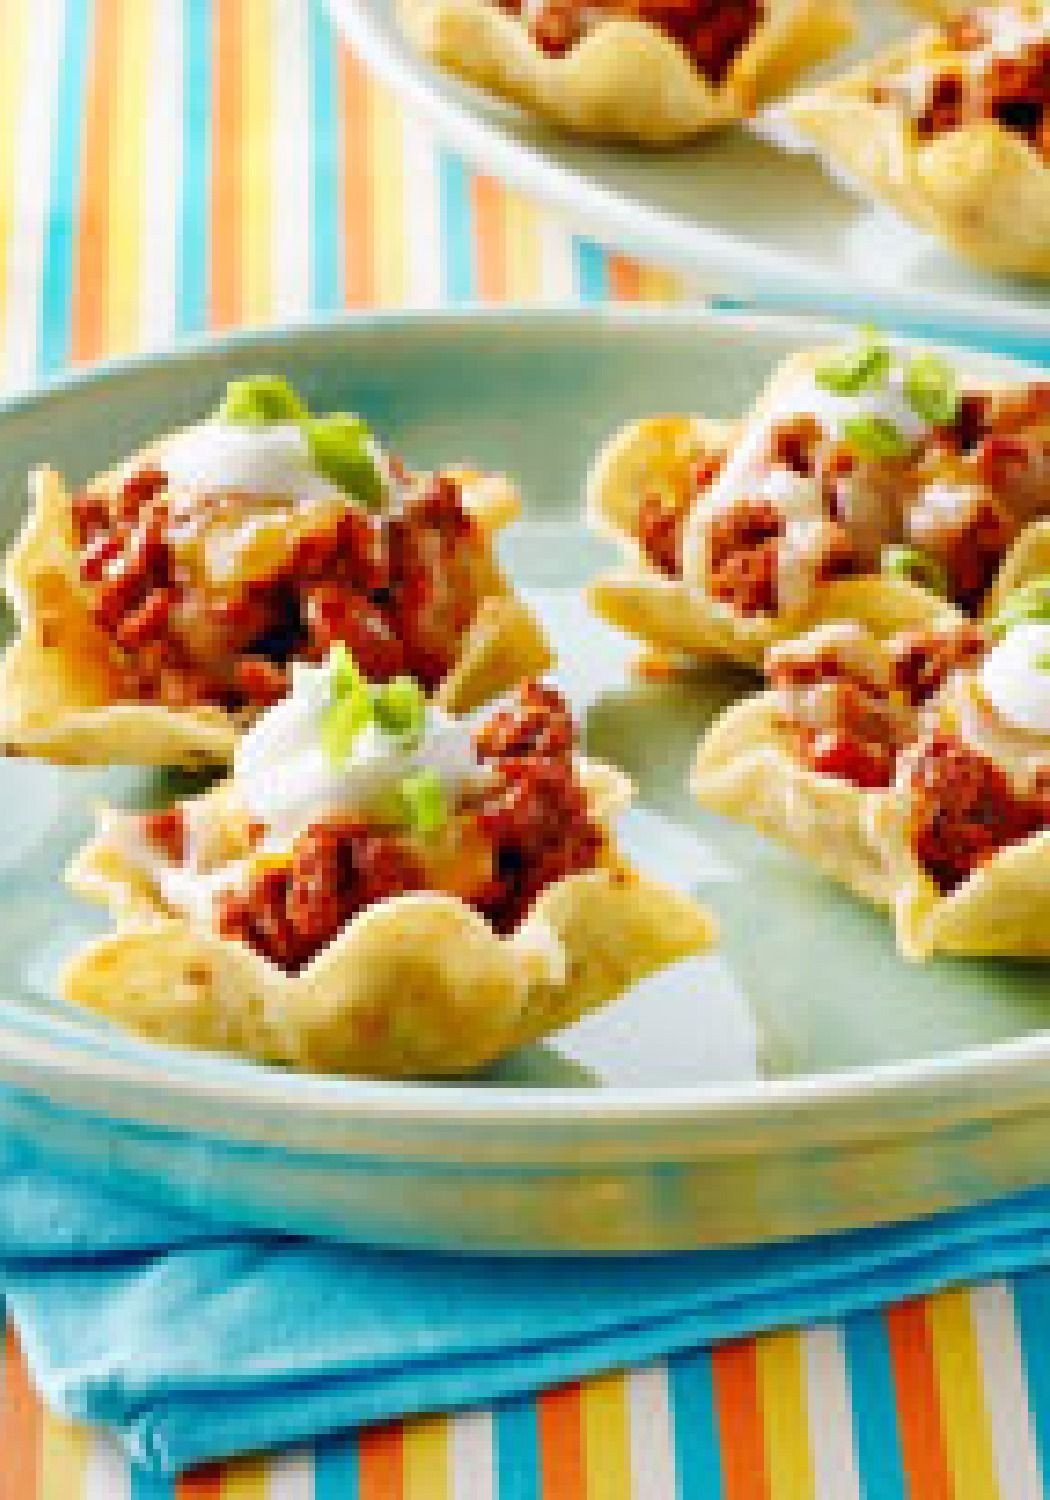 Ground Beef Appetizers
 Tortilla Appetizer Bites – Made with ground beef salsa